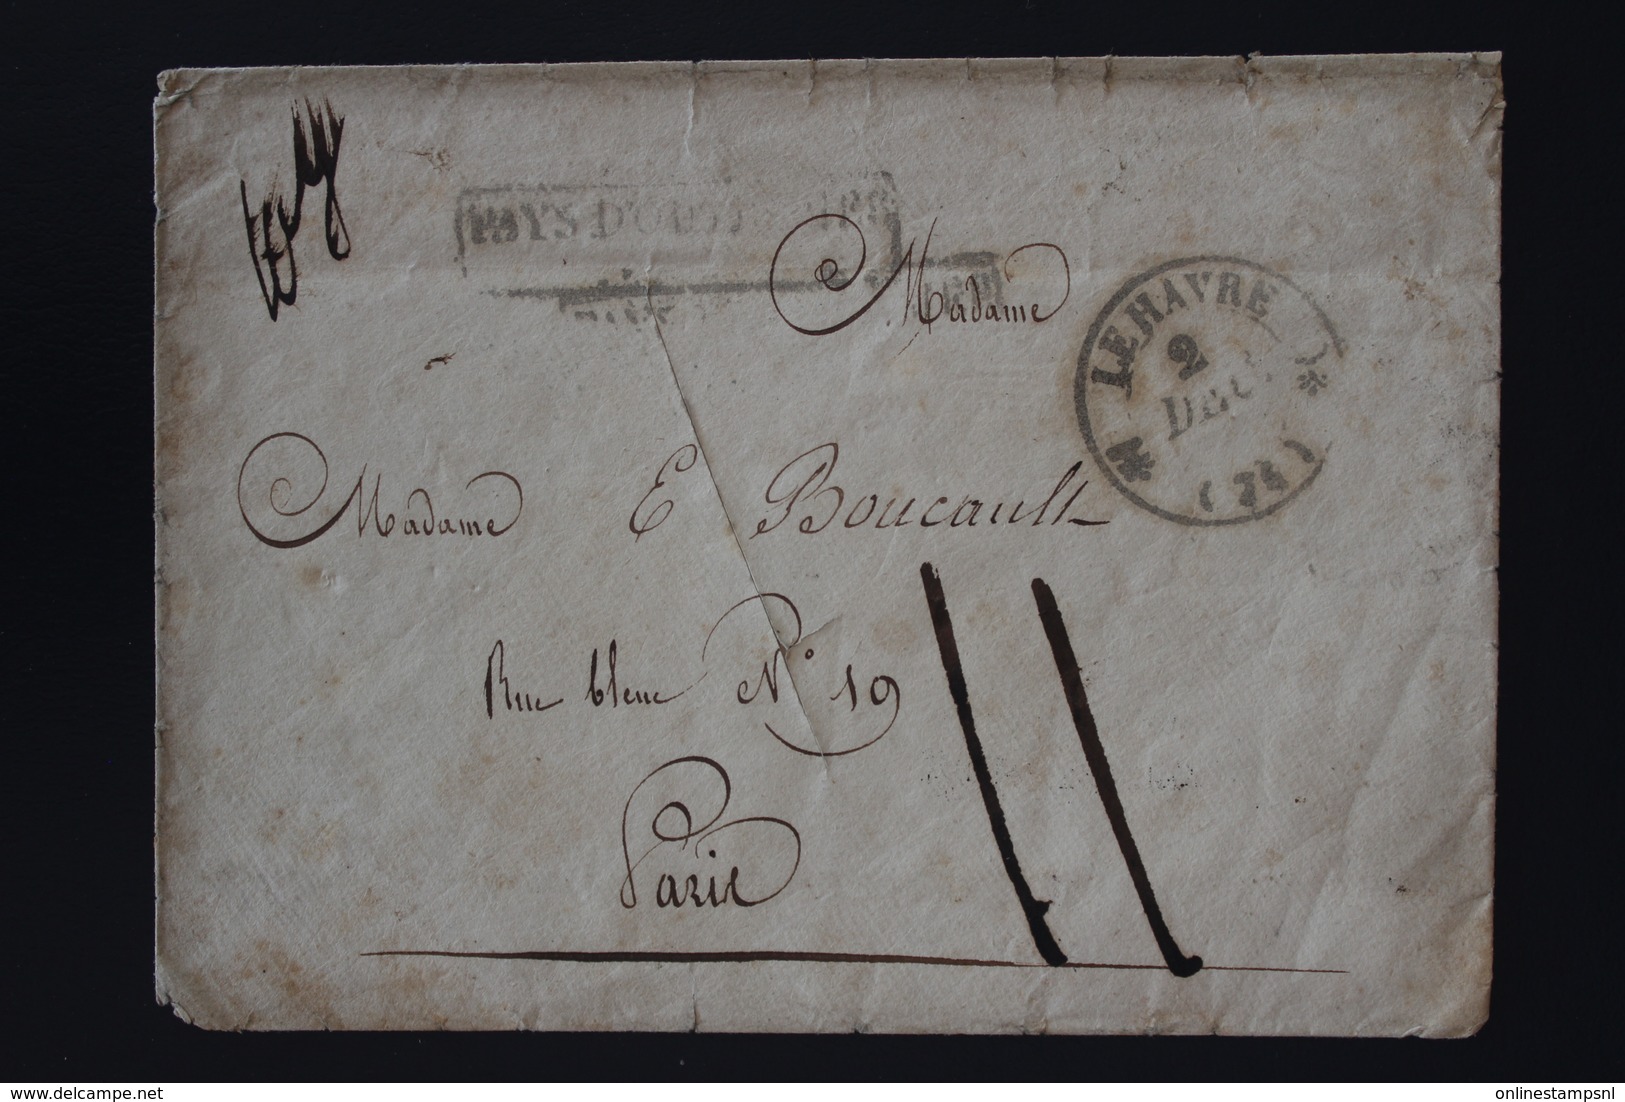 Guadeloupe Cover Disinfected By Slit / Désinfecté Fendre  Dec 1831 BAsse Terre / Pays D'Outremer Date In Blue (back) - Lettres & Documents